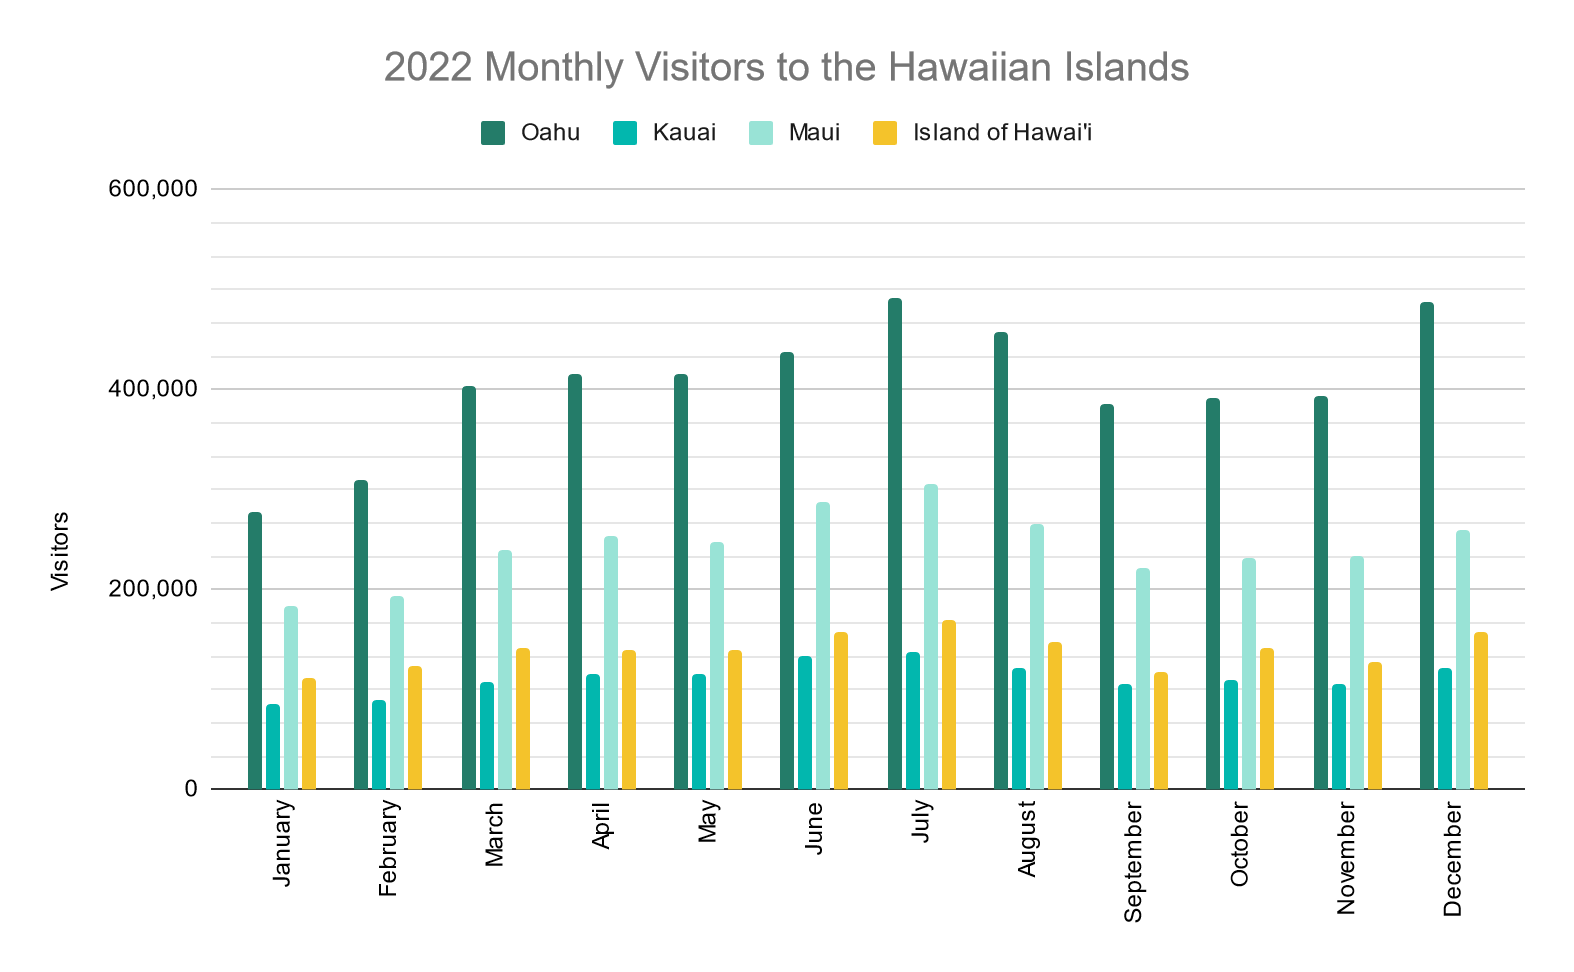 Chart showing the monthly visitors to Hawaii by island